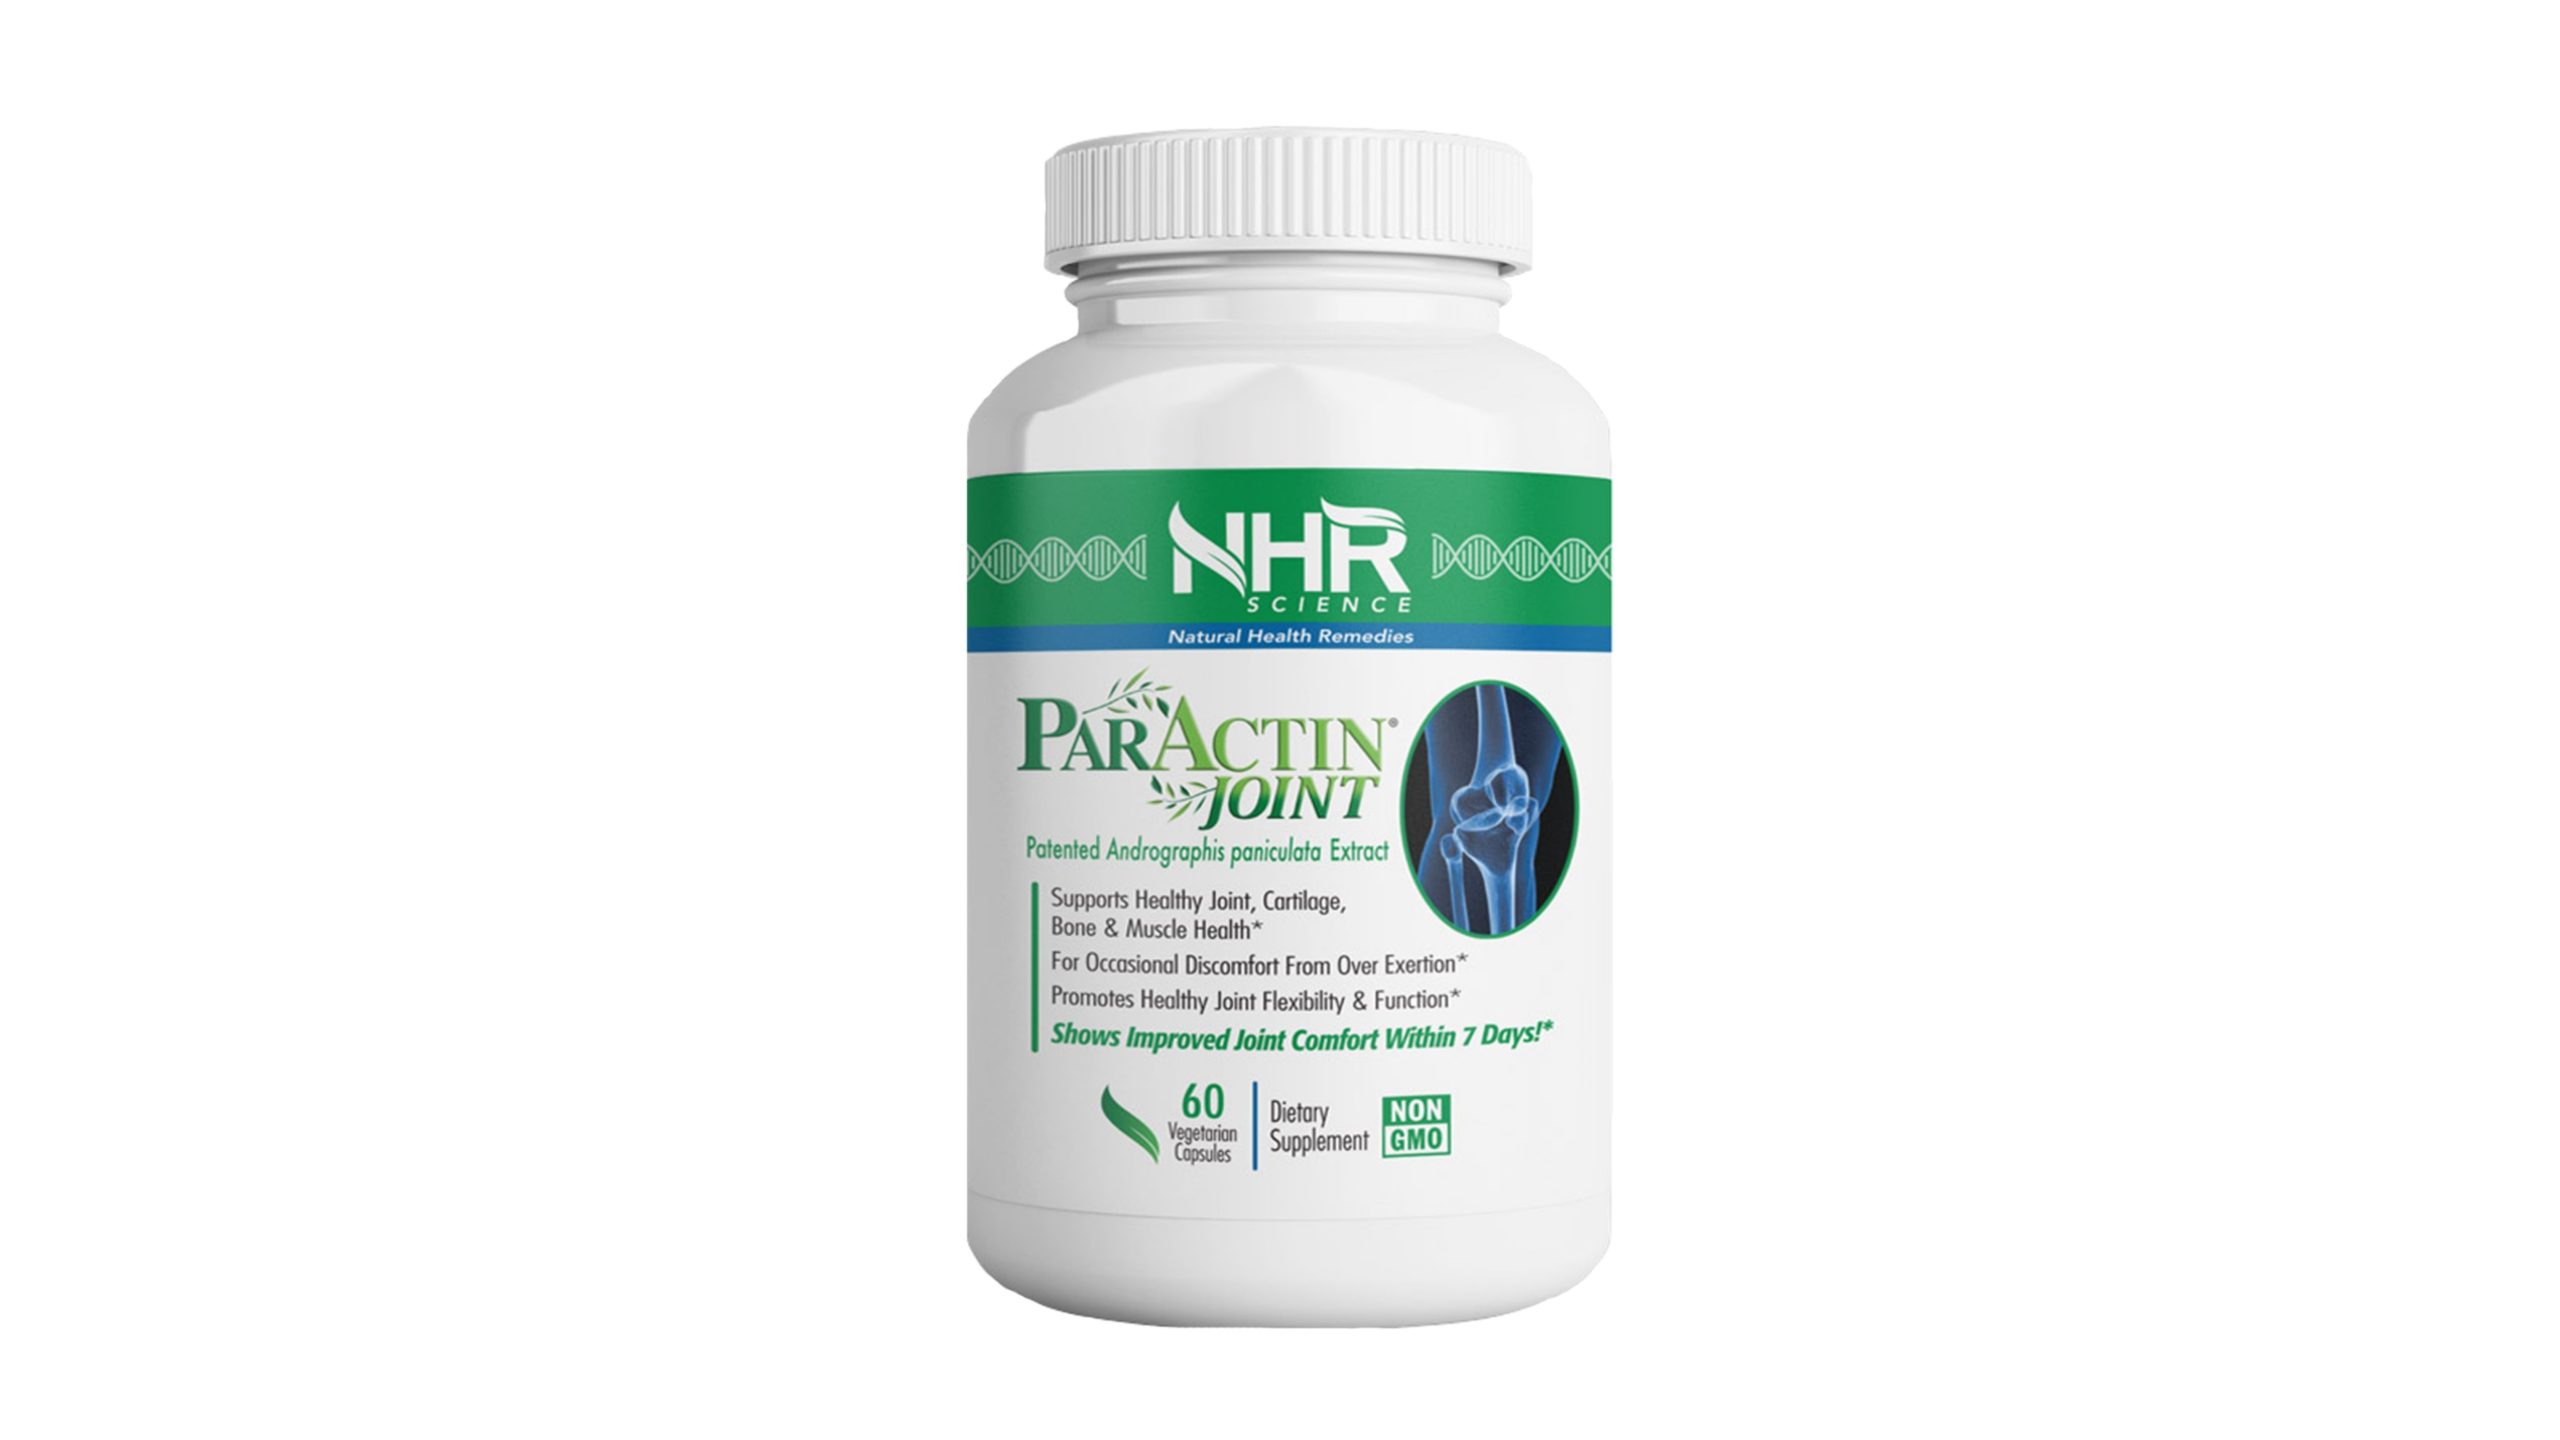 NHR Science ParActin Joint Reviews: Does It Reduce Body Inflammation?